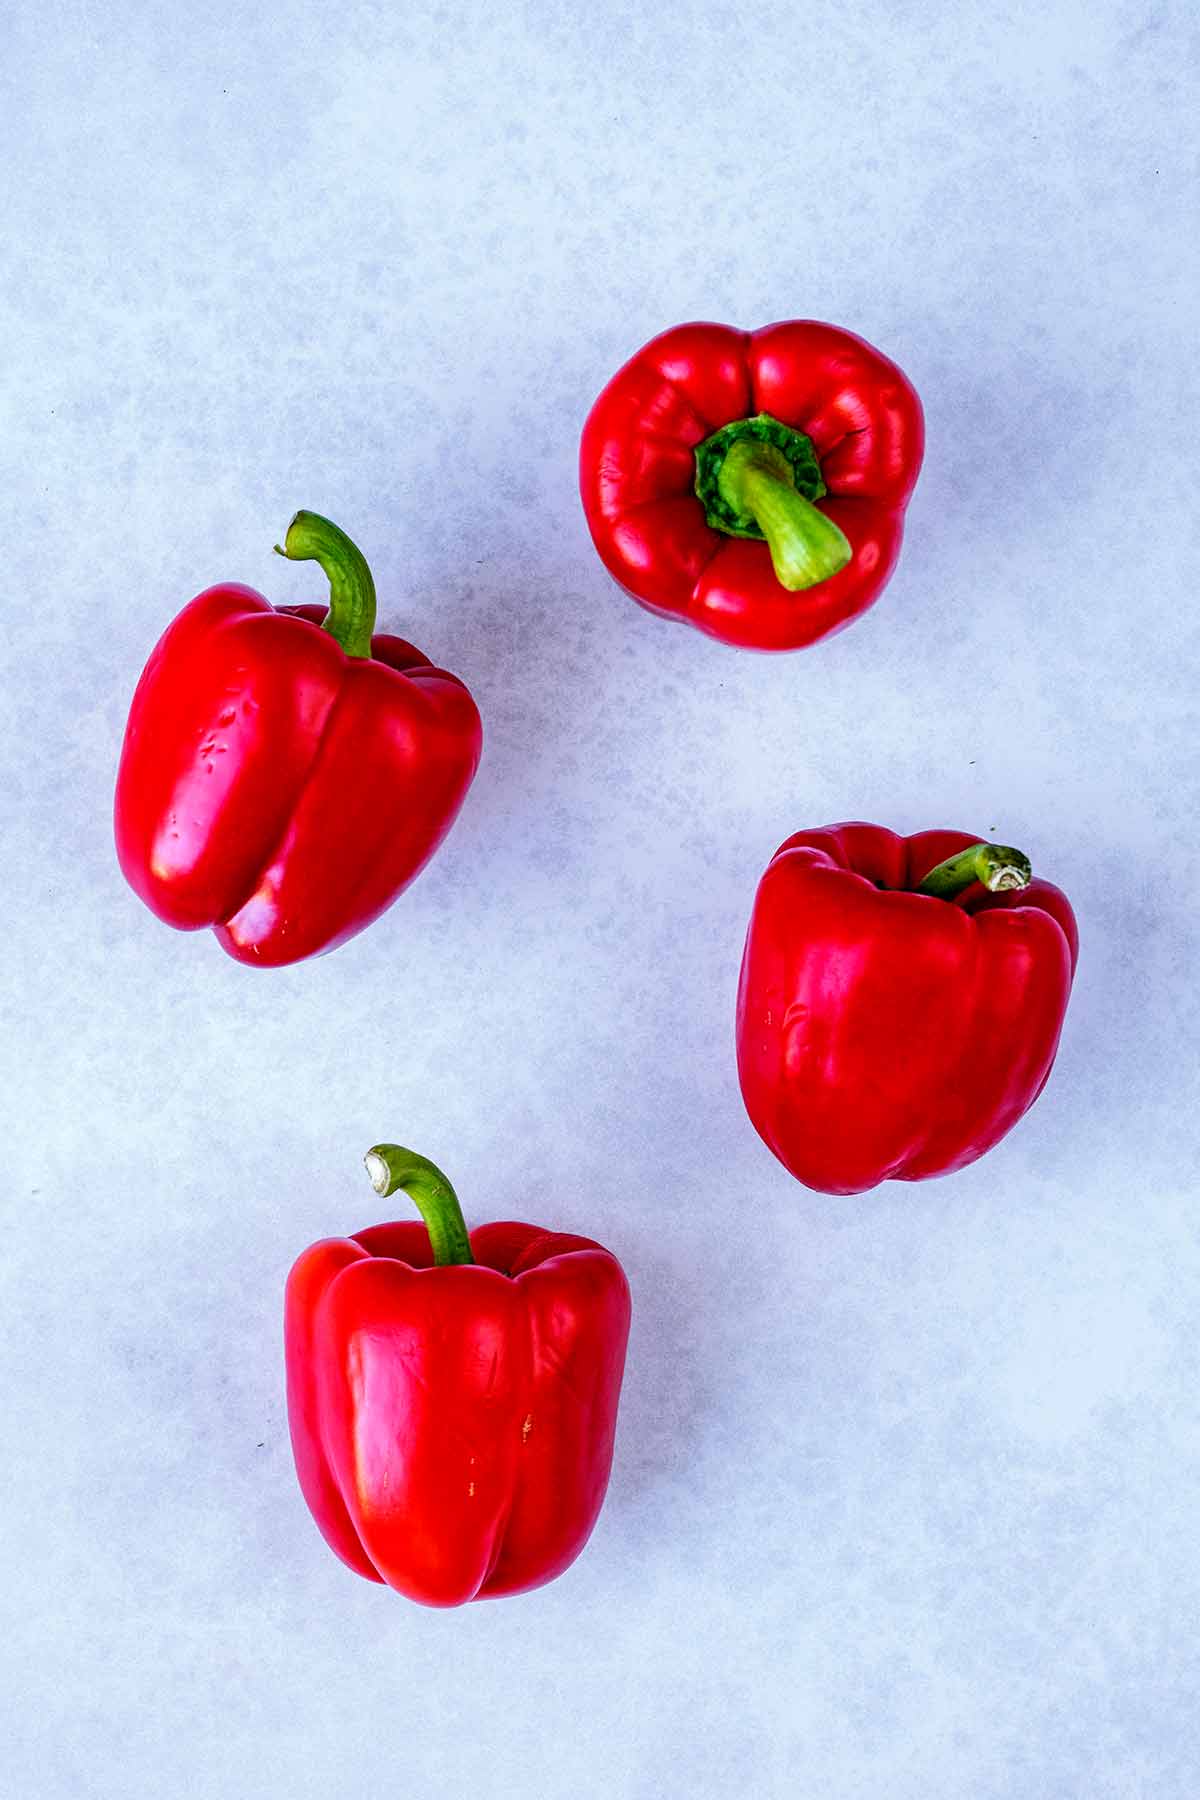 Four red bell peppers on a stone surface.